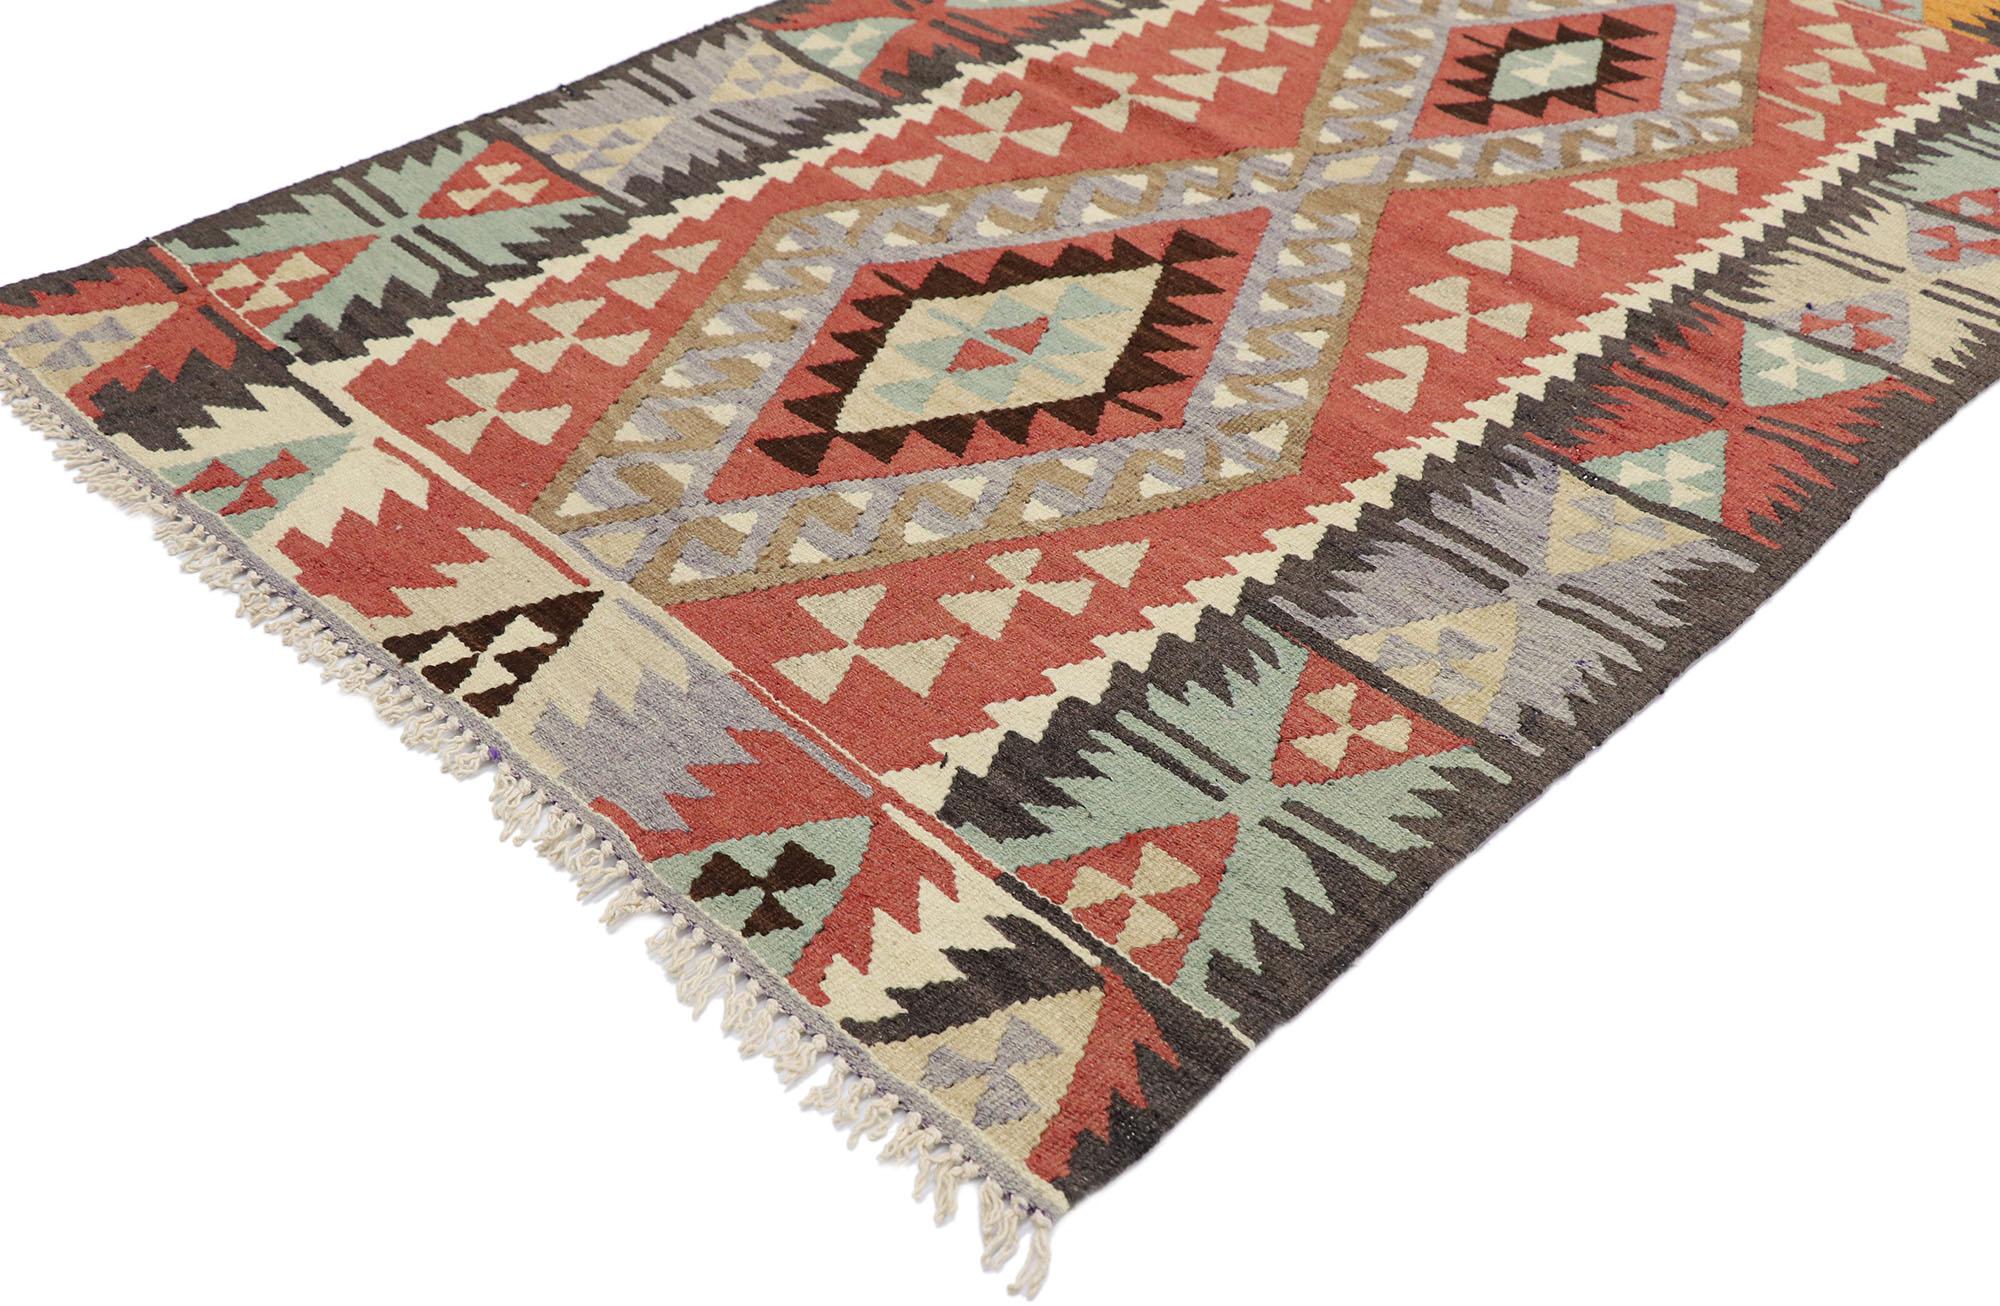 77833 vintage Persian Shiraz Kilim rug with Boho Chic Tribal style 03'02 x 04'10. Full of tiny details and a bold expressive design combined with vibrant colors and tribal style, this hand-woven wool vintage Persian Shiraz kilim rug is a captivating